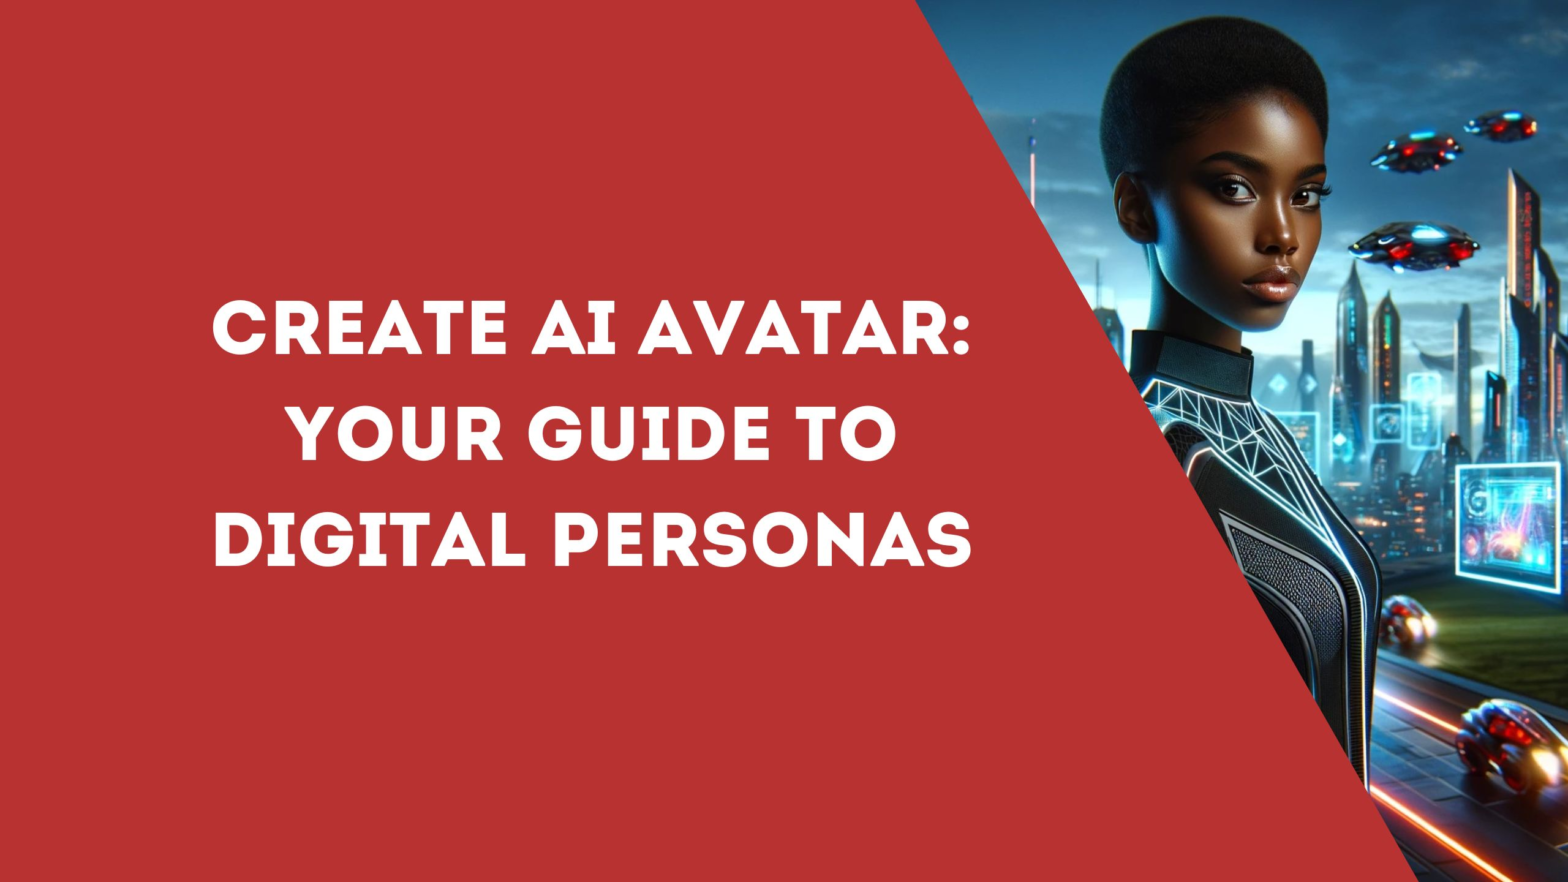 Create an AI Avatar: Your Guide to Digital Personas